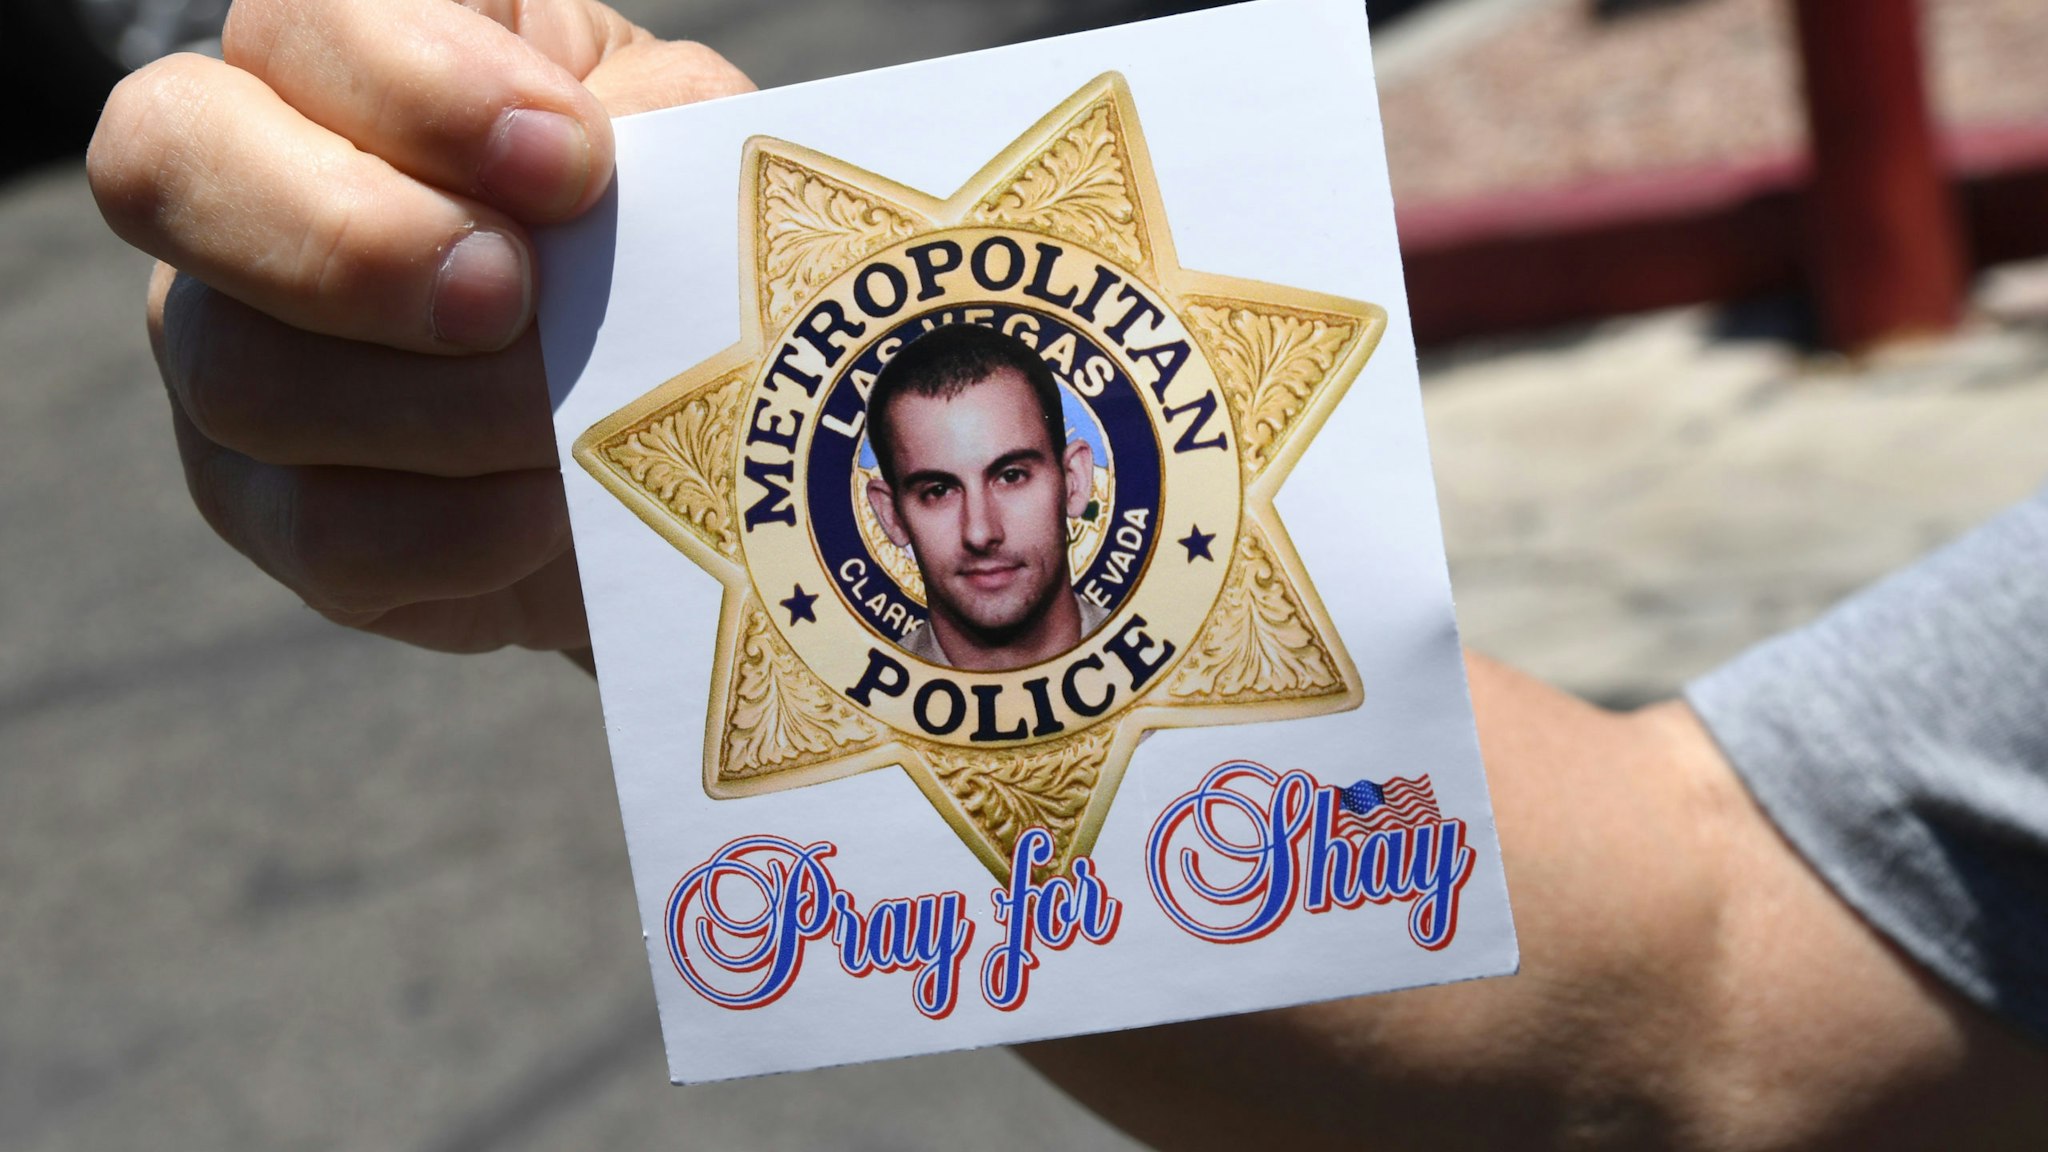 LAS VEGAS, NEVADA - JUNE 11: A woman displays a sticker she received at an Injured Police Officers Fund (IPOF) of Nevada "Shay Day" fundraiser for Las Vegas Metropolitan Police Department Officer Shay Mikalonis at the Sahara West Urgent Care & Wellness parking lot on June 11, 2020 in Las Vegas, Nevada. Mikalonis was shot in the head during an anti-racism protest on the Las Vegas Strip in the wake of George Floyd's death on June 1. He is on a ventilator and is listed in critical condition at University Medical Center of Southern Nevada. Edgar Samaniego, 20, who was not part of the protest, was arrested for the shooting and is facing charges including attempted murder. (Photo by Ethan Miller/Getty Images)